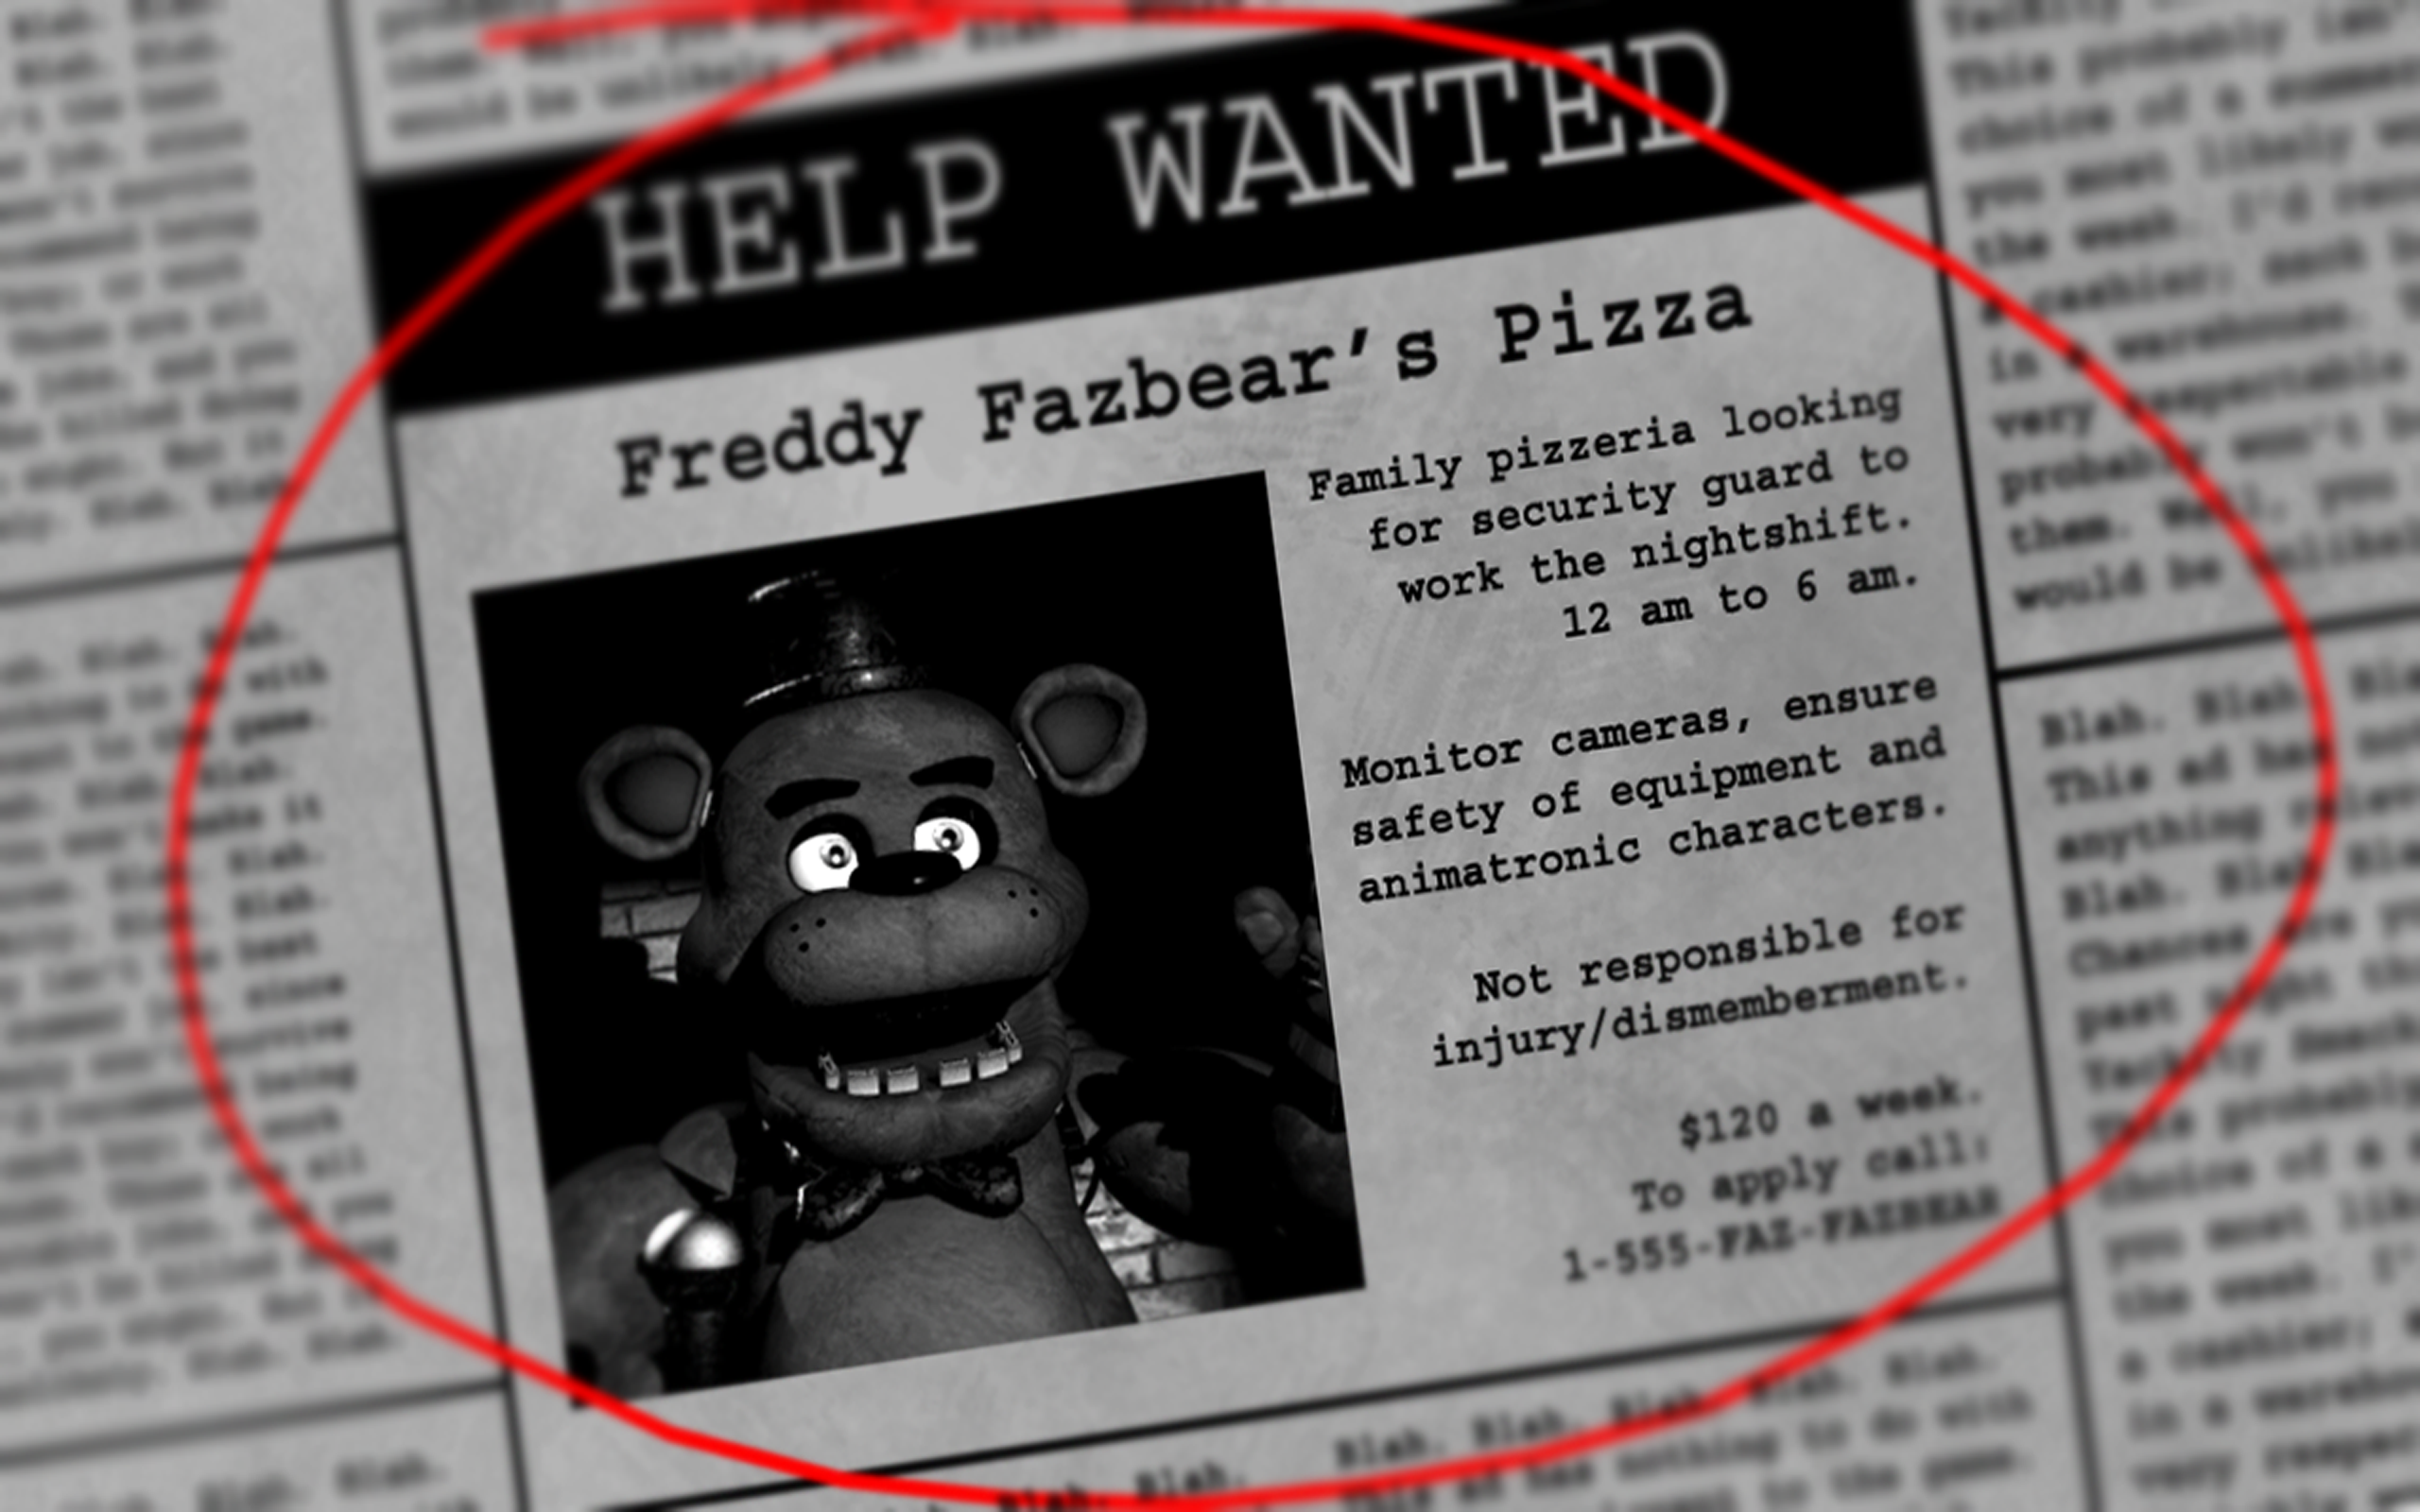 Five Nights at Freddys Download - FNaF 1 free download on PC